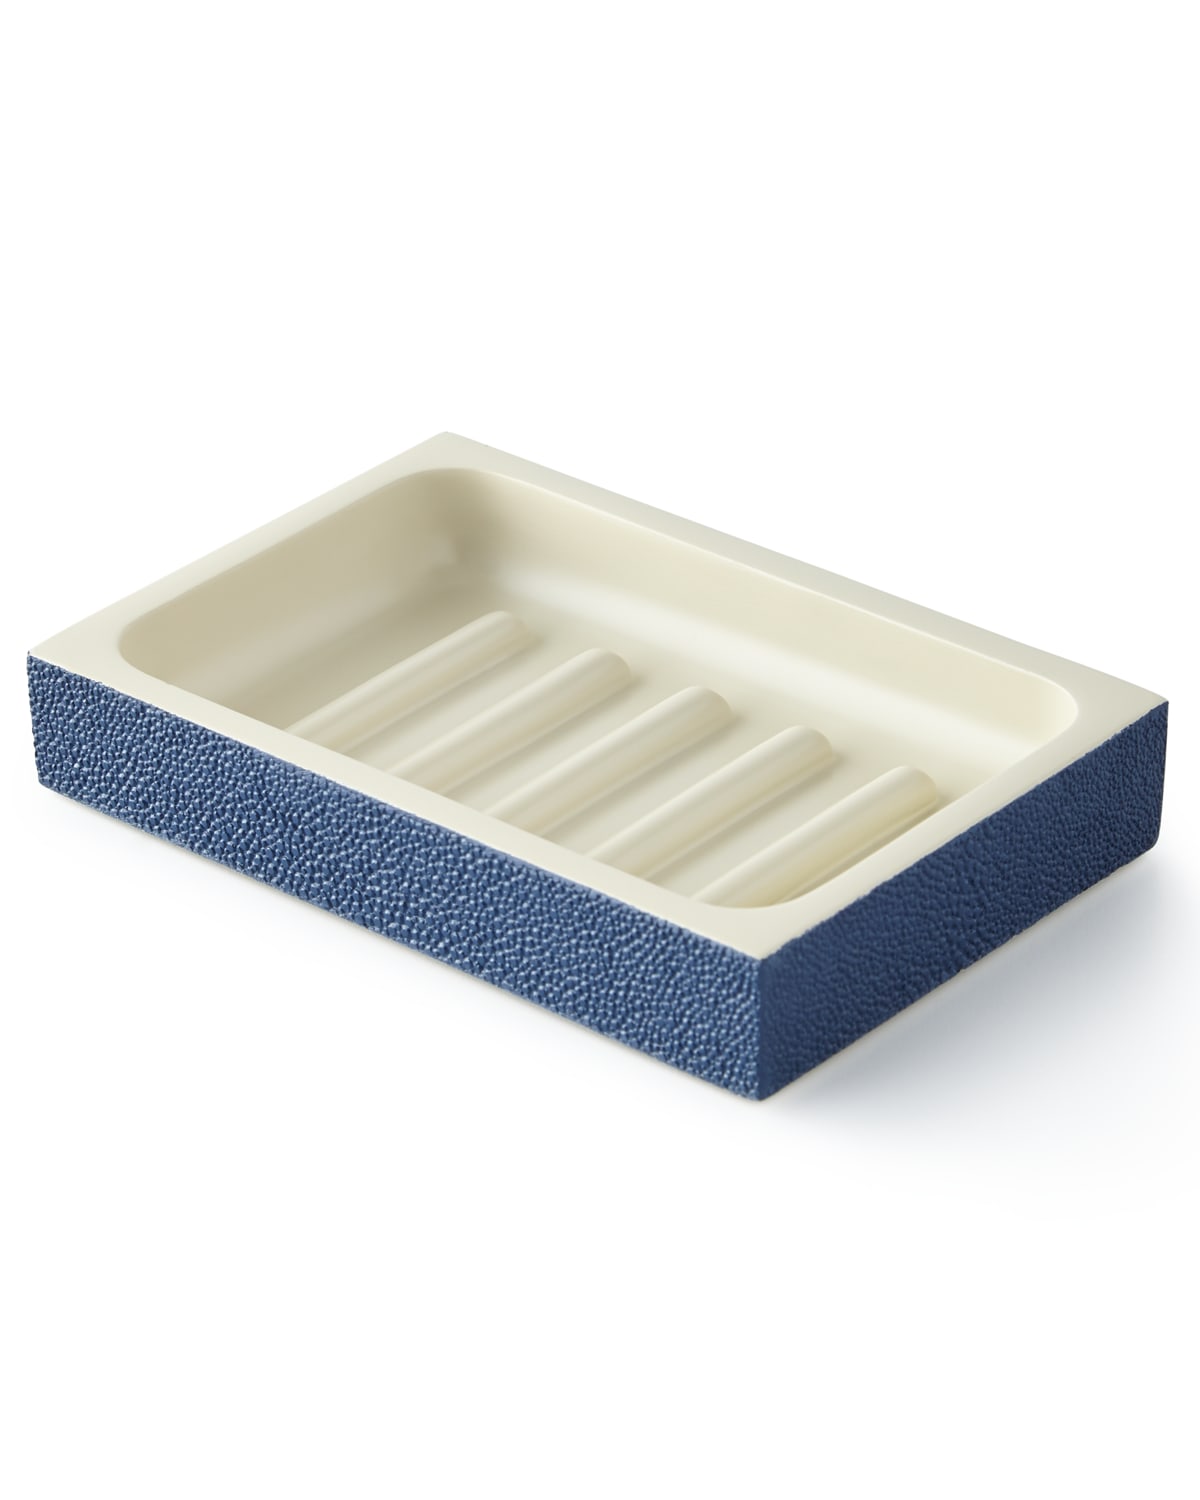 Pigeon & Poodle Manchester Soap Dish In Navy